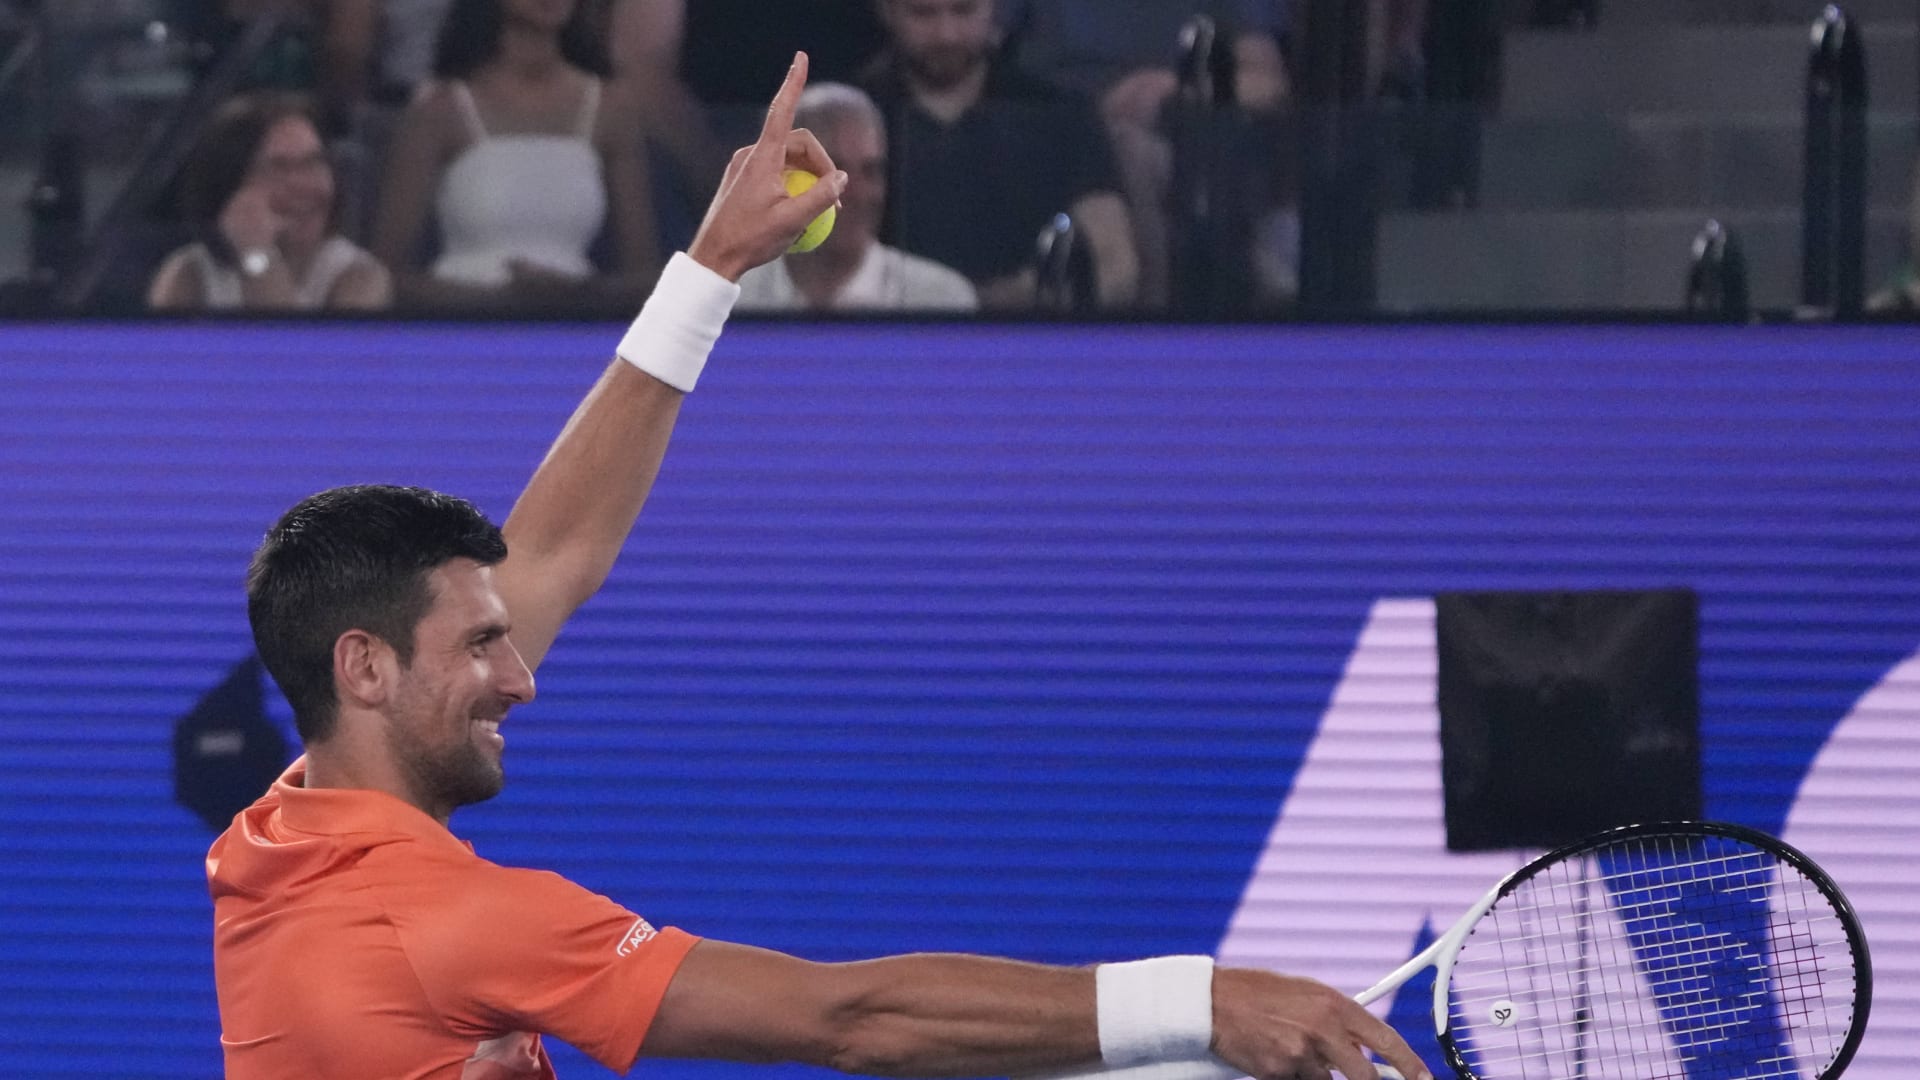 In exhibition with Kyrgios, Djokovic receives warm welcome in Melbourne return